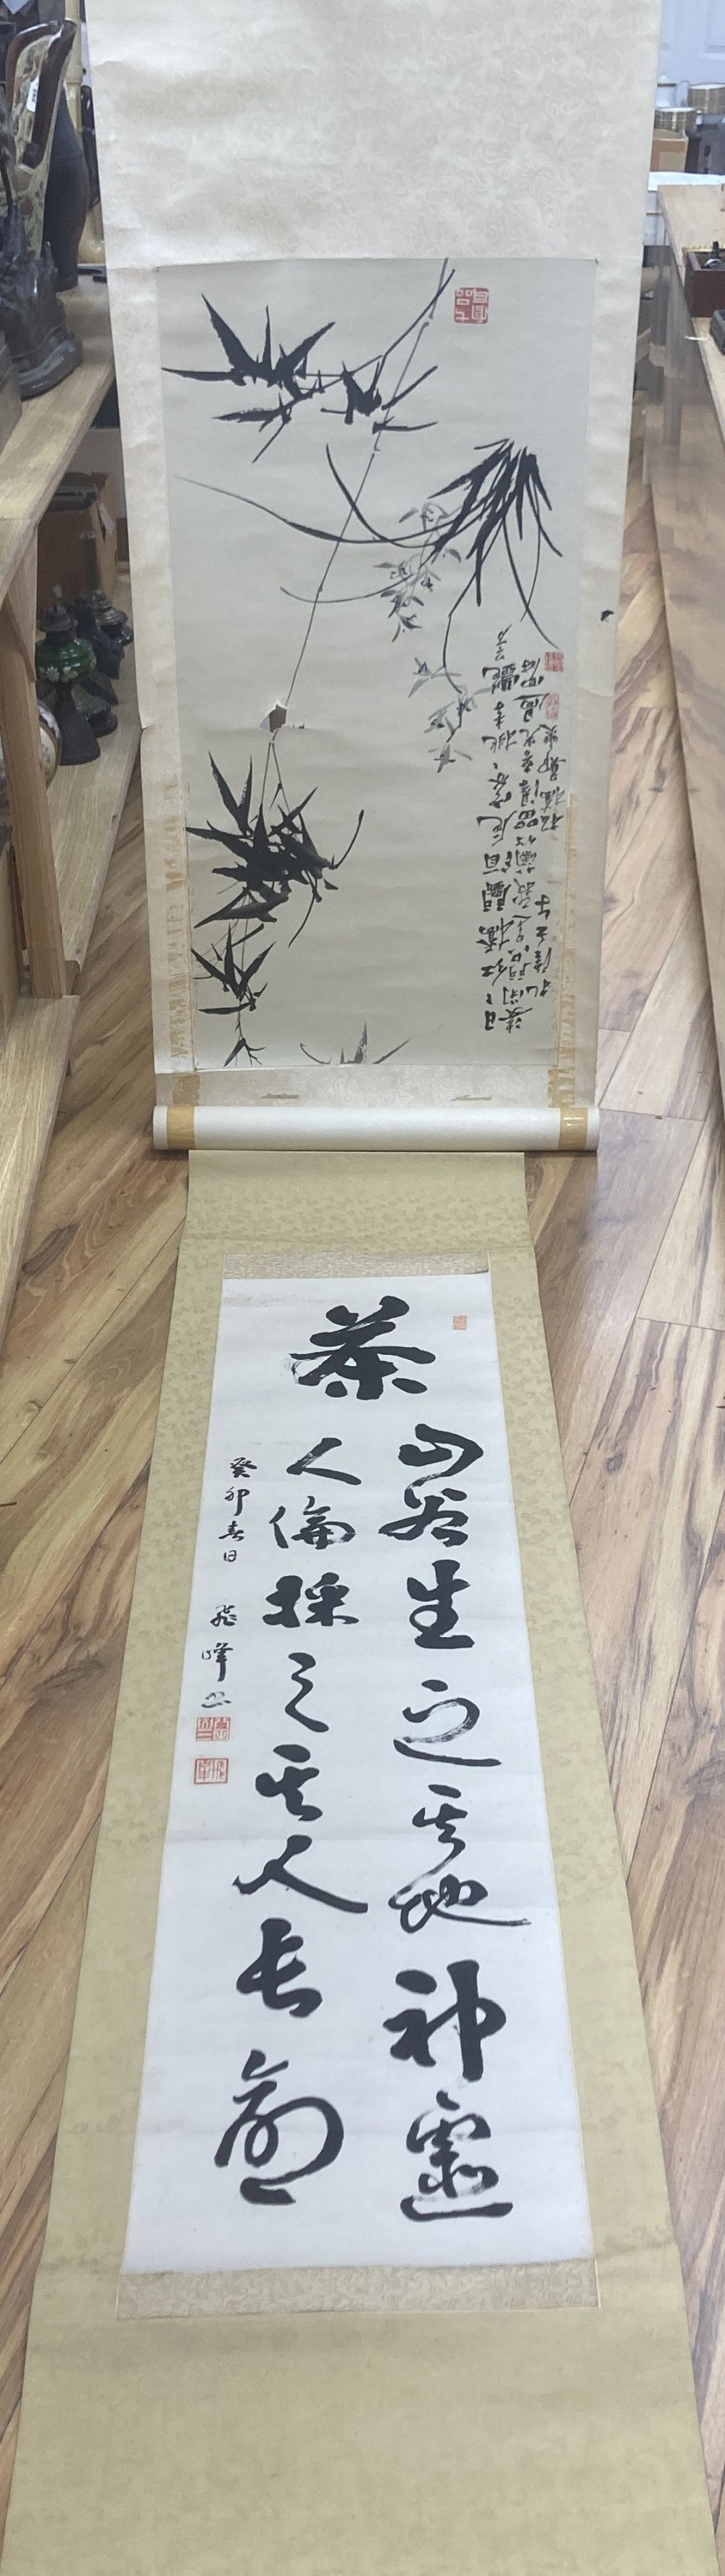 Two Chinese calligraphic scrolls